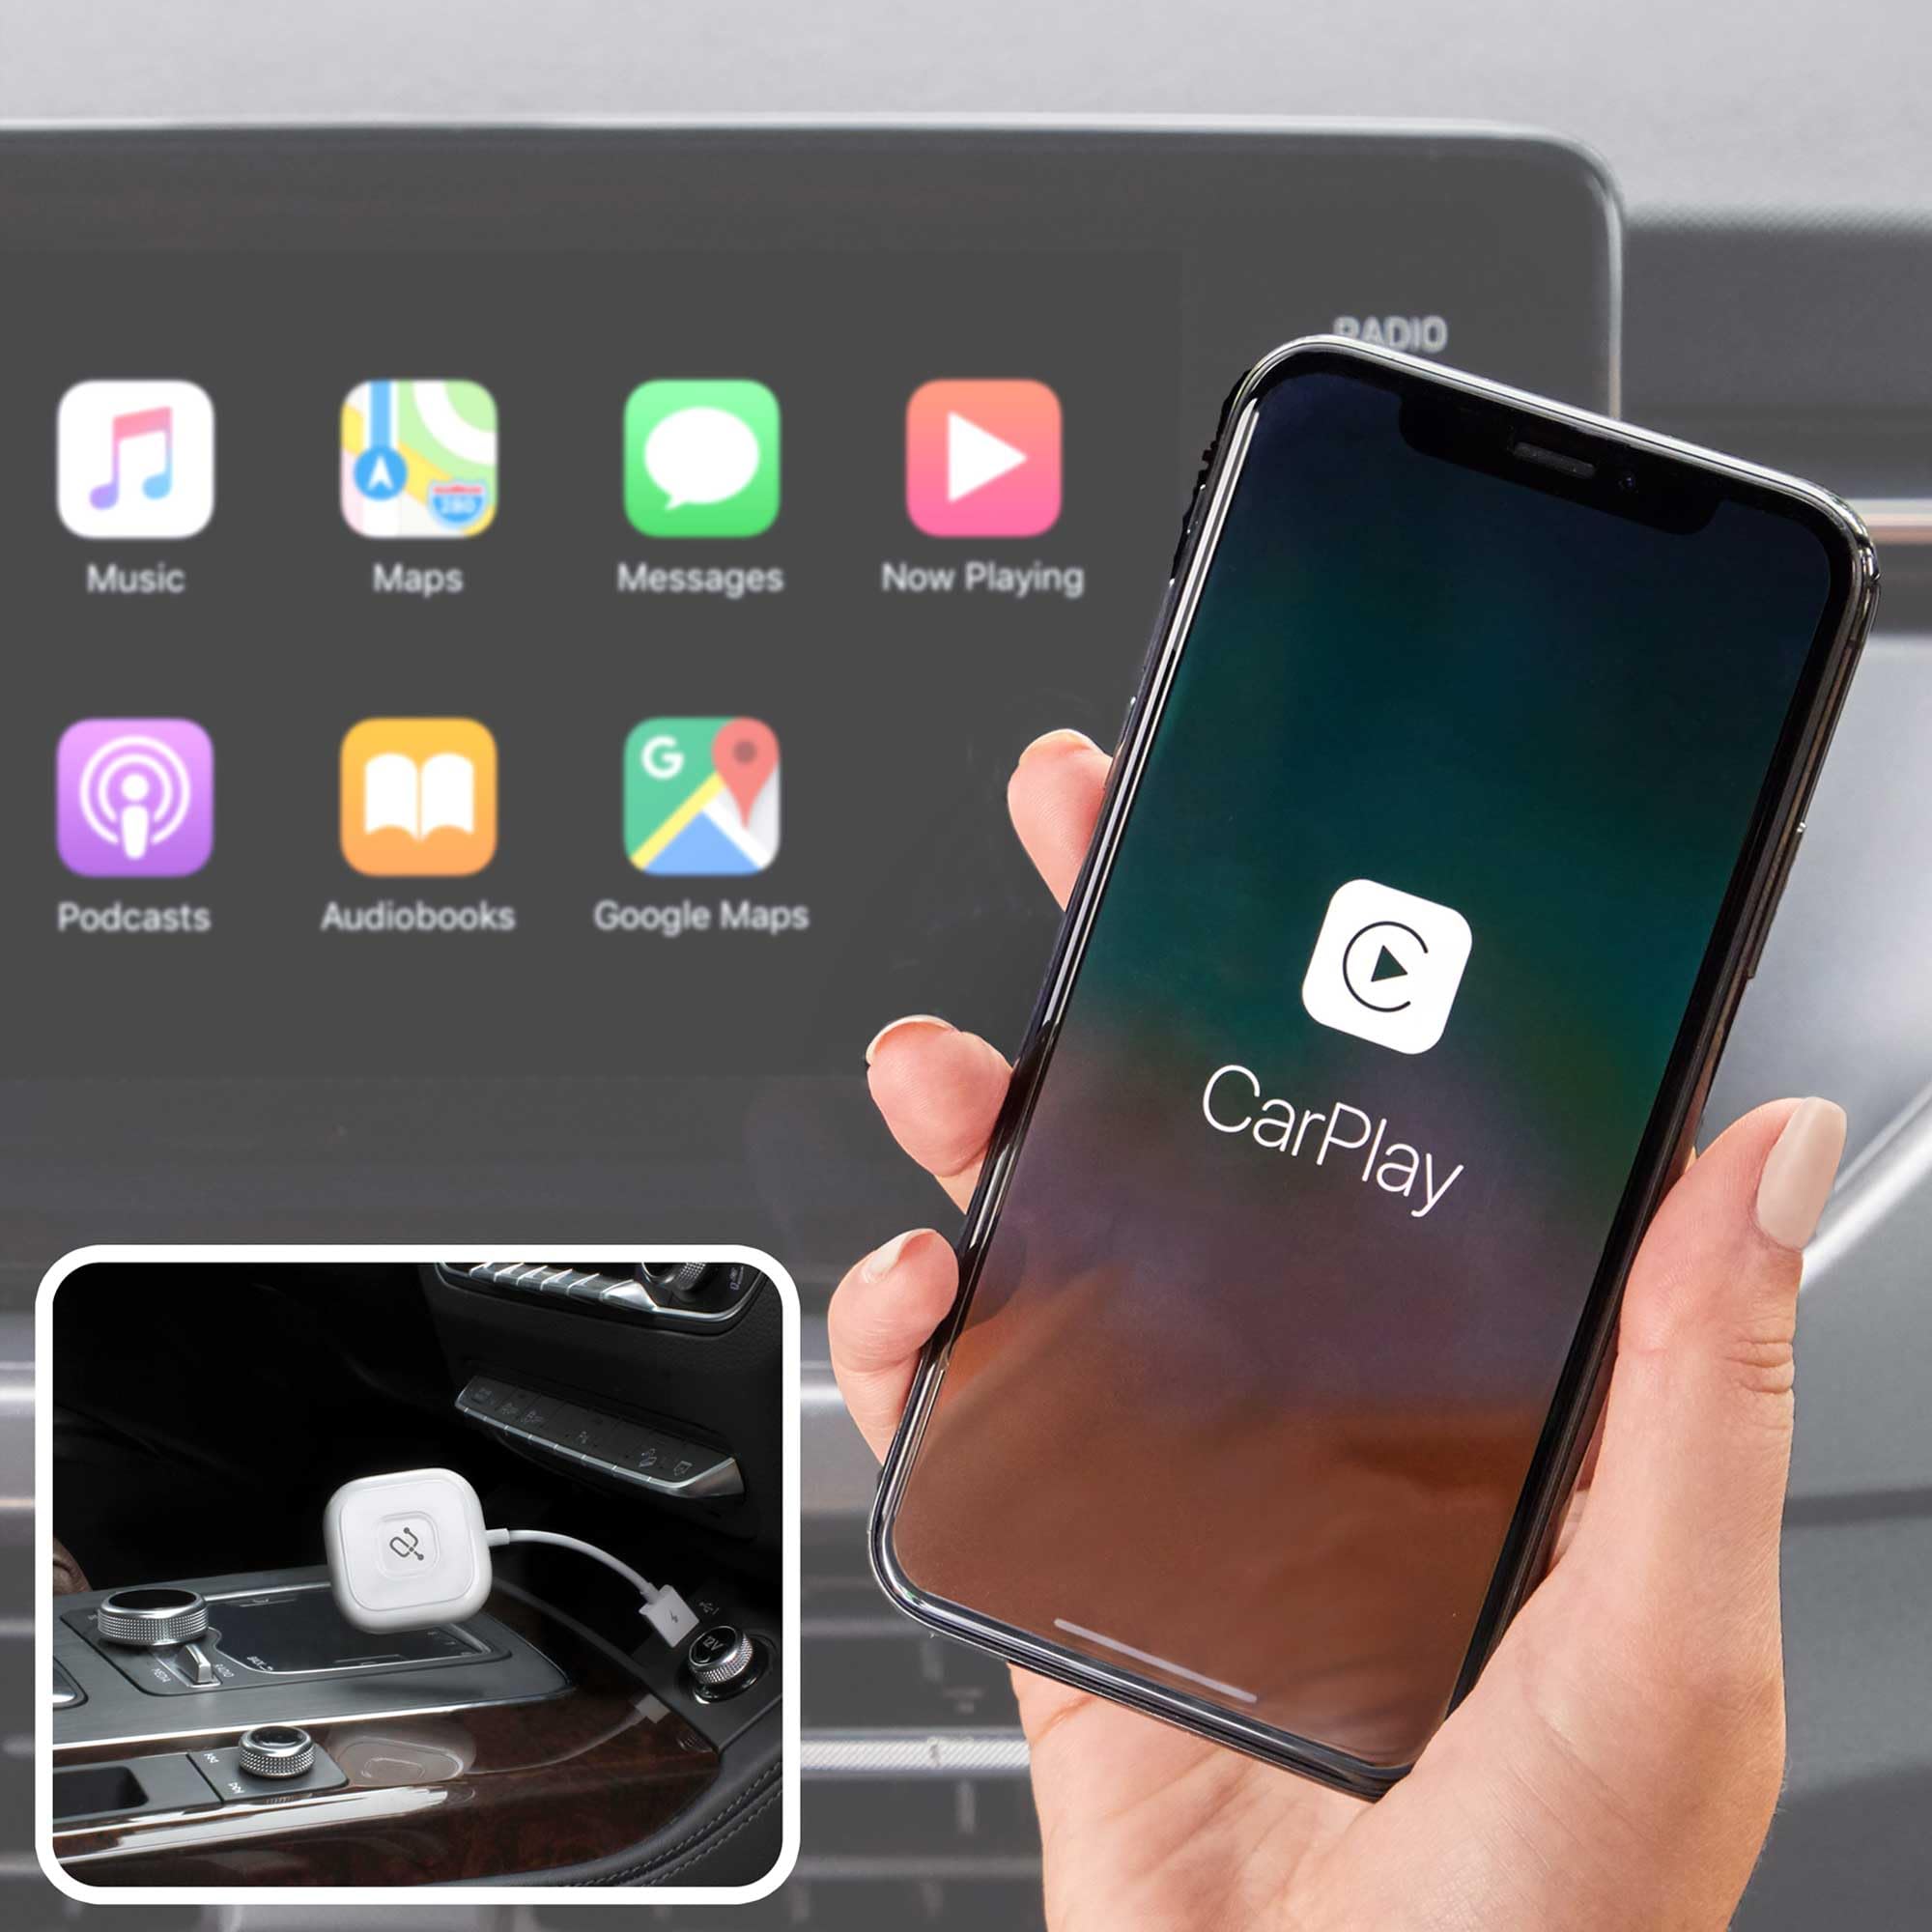 Aluratek Wireless CarPlay Adapter - Newest CarPlay Wireless Adapter, Convert Factory Wired Carplay to Wireless Carplay, Plug & Play, Easy Use for Cars, iPhone iOS Compatible, Fast WiFi 5.8GHz